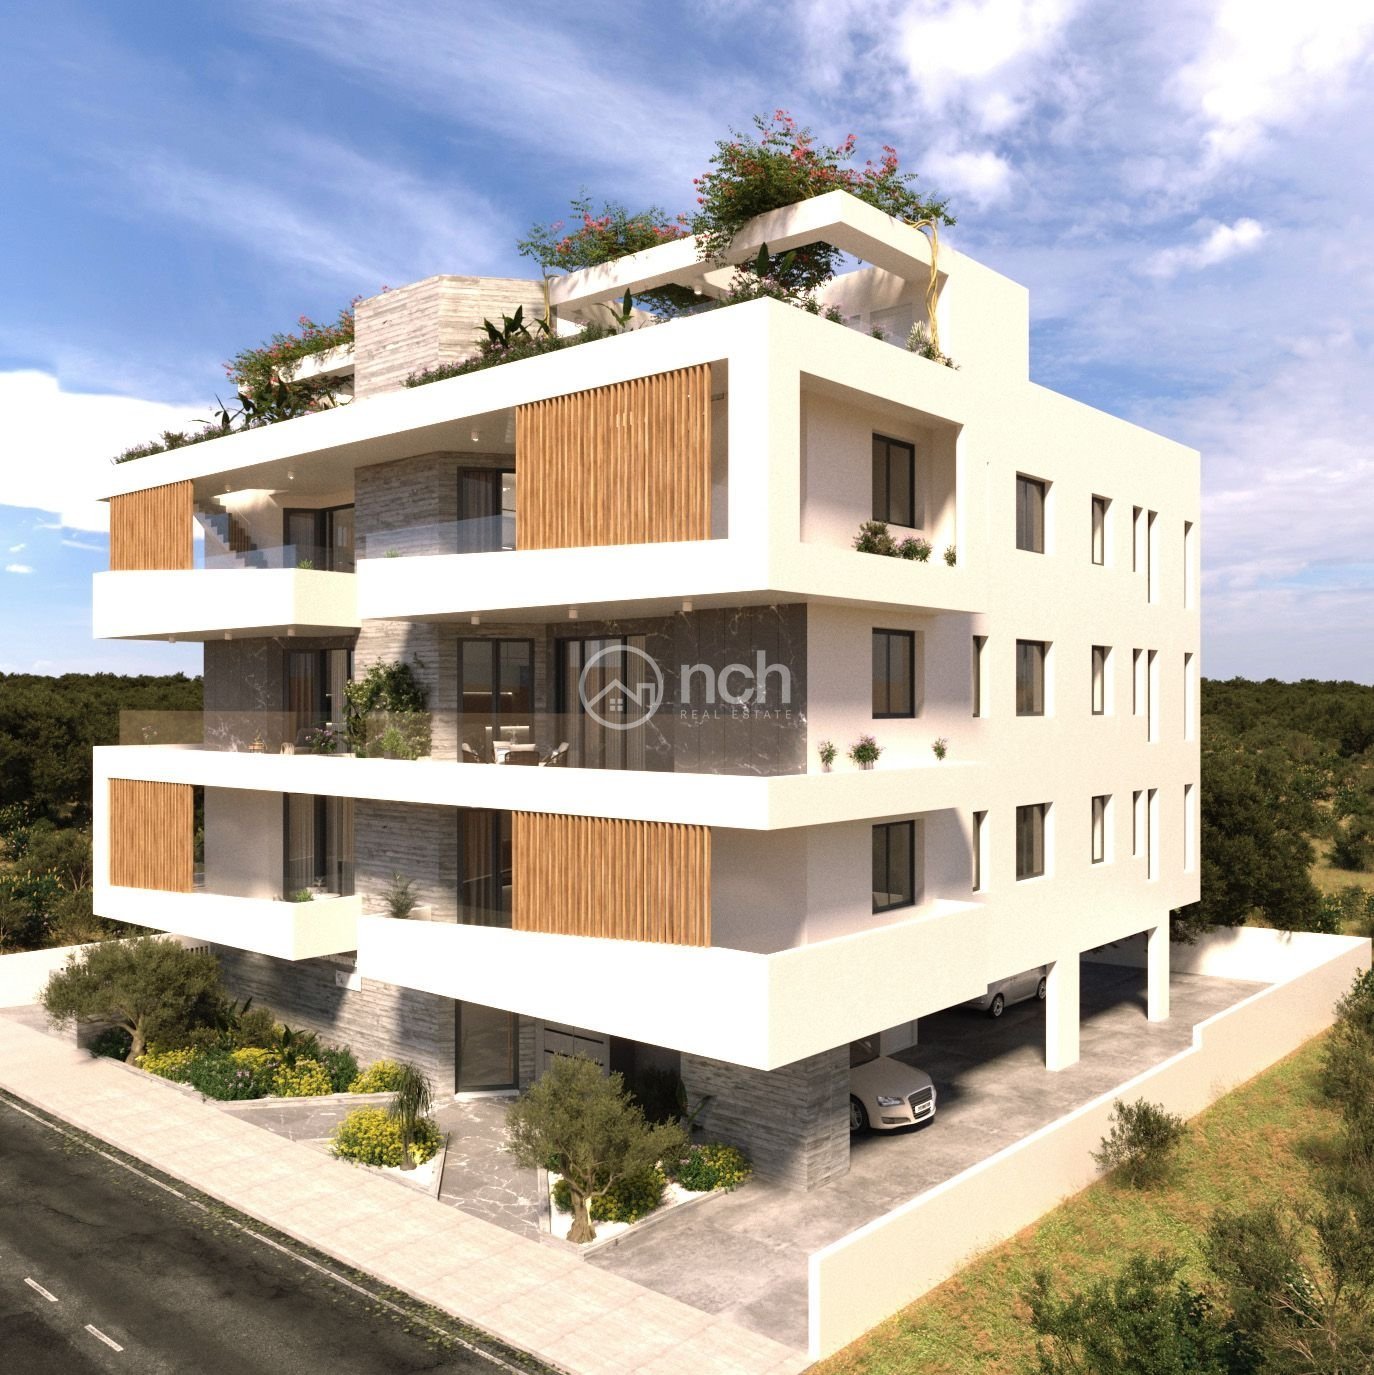 1 Bedroom Apartment for Sale in Strovolos – Chryseleousa, Nicosia District